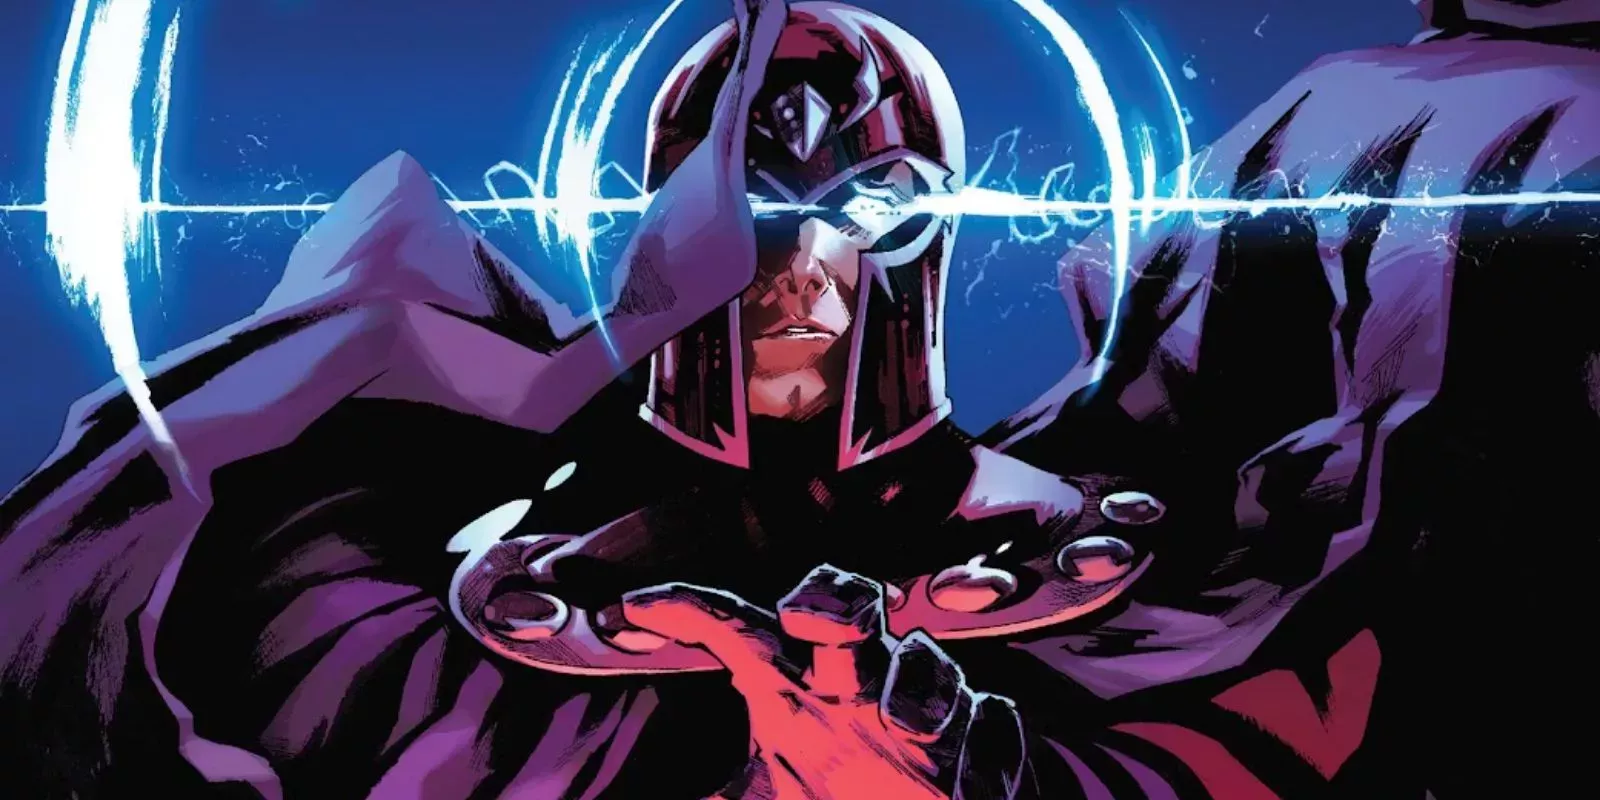 Magneto hovers and his eyes gleam beneath his helmet in the Trial of Magneto